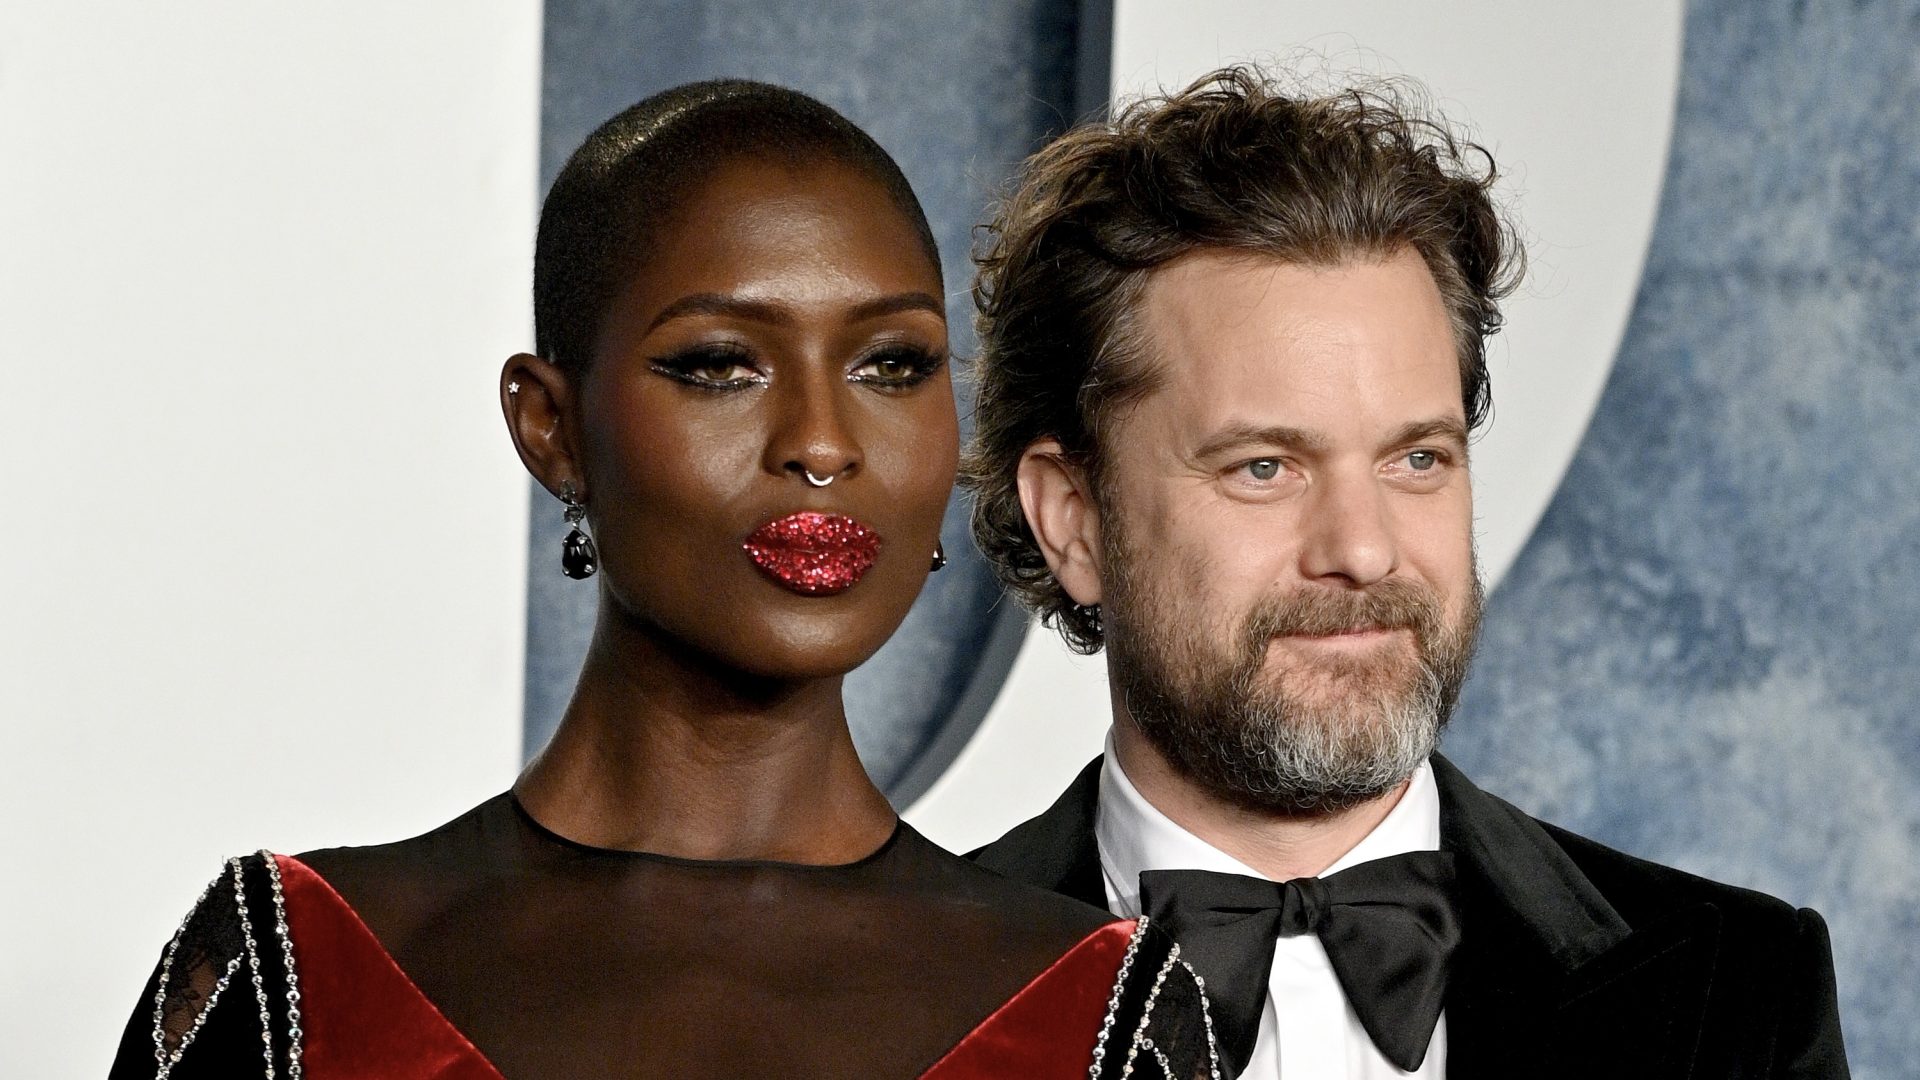 BEVERLY HILLS, CALIFORNIA - MARCH 12: Jodie Turner-Smith and Joshua Jackson attend the 2023 Vanity Fair Oscar Party Hosted By Radhika Jones at Wallis Annenberg Center for the Performing Arts on March 12, 2023 in Beverly Hills, California.